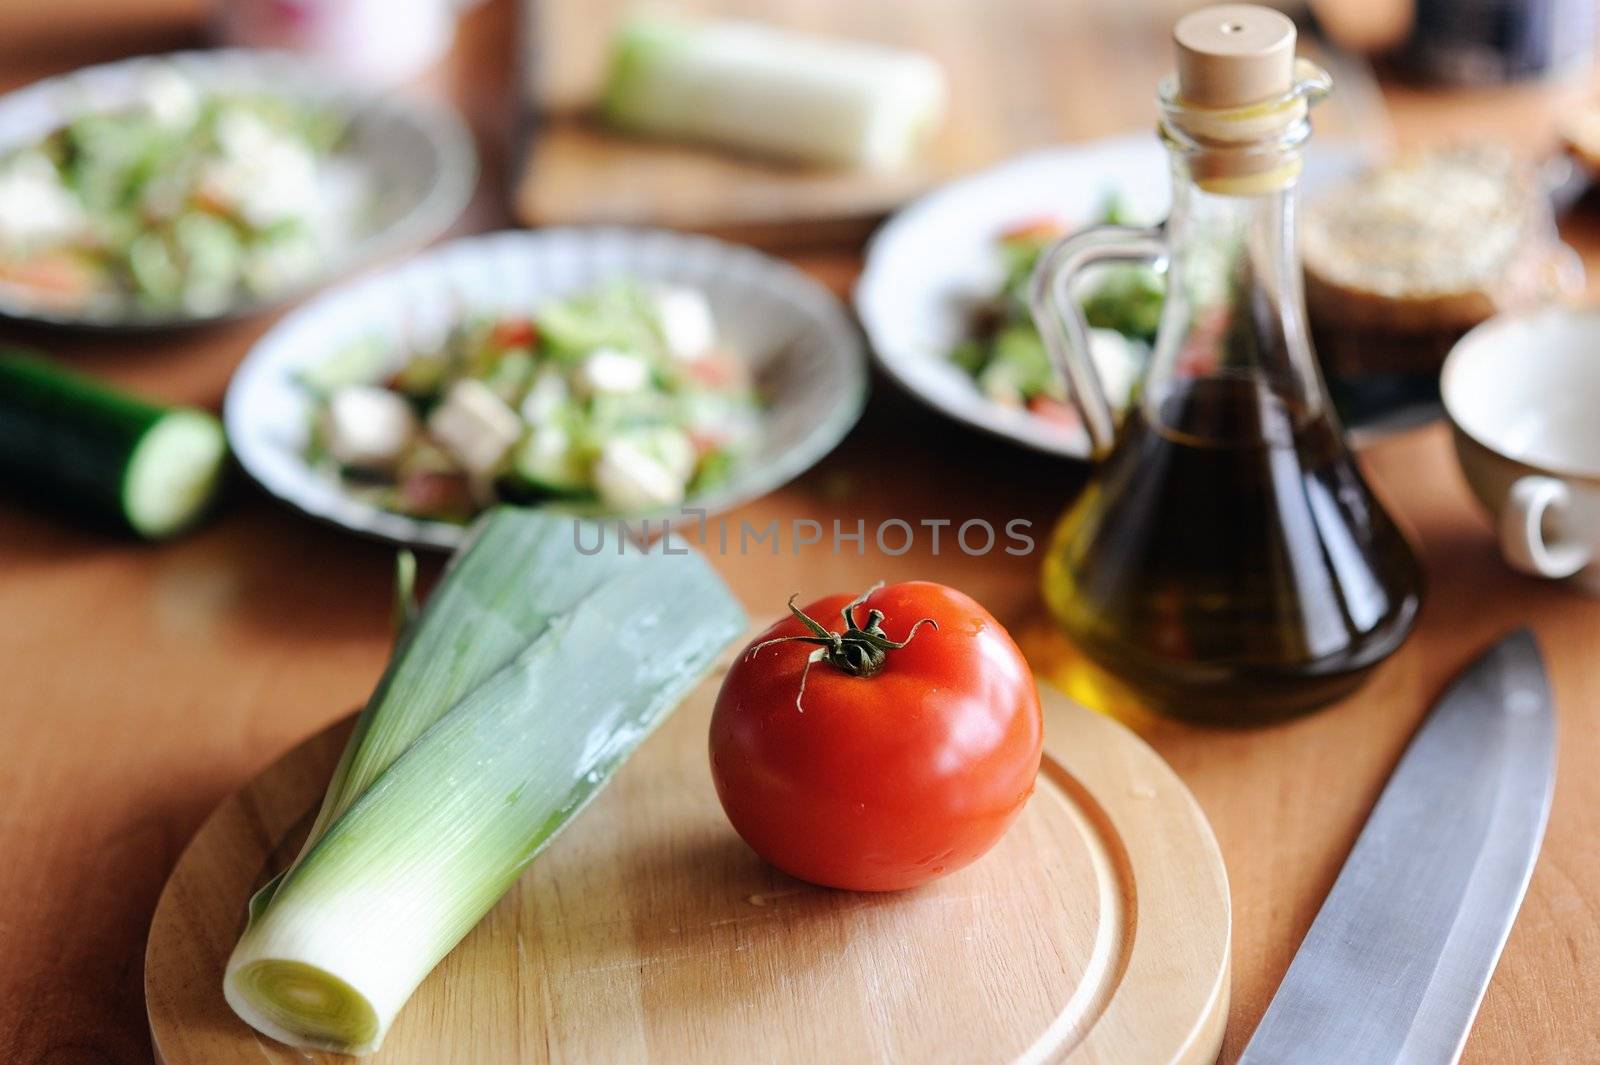 An image of healthy food on a wooden board